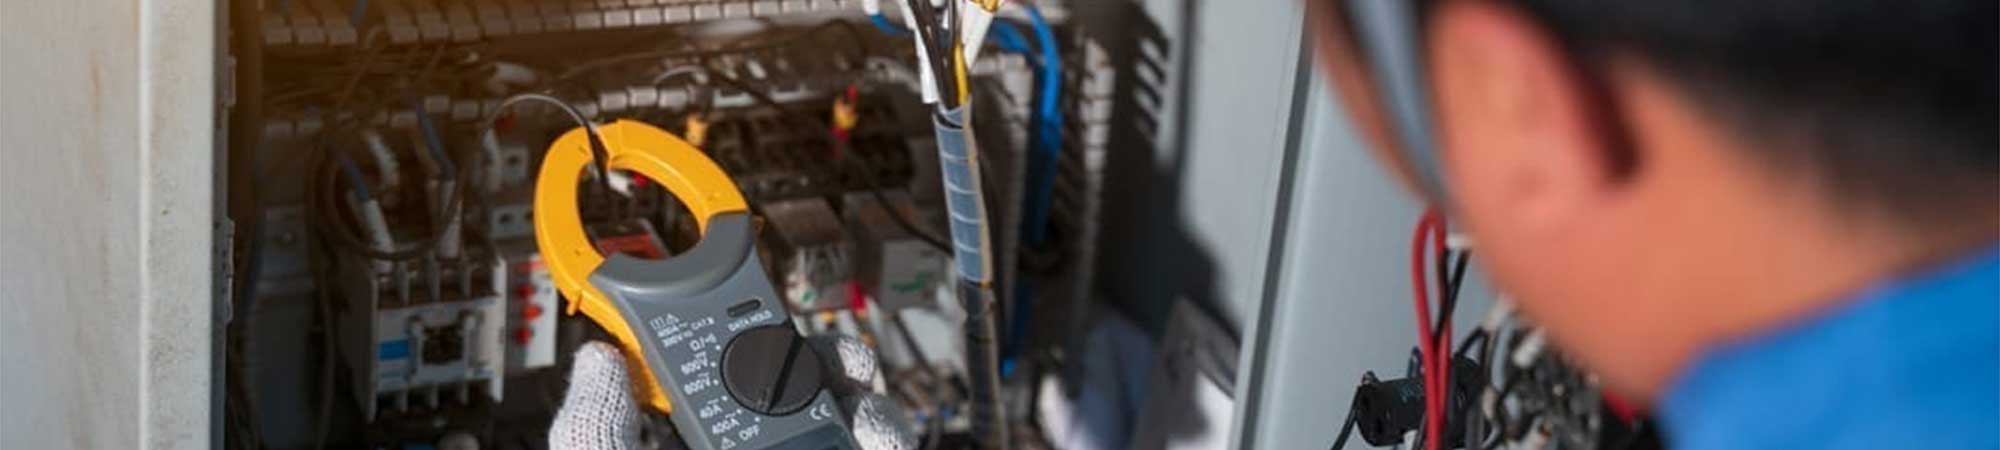 Electrical services for your home and business in Perth, WA.